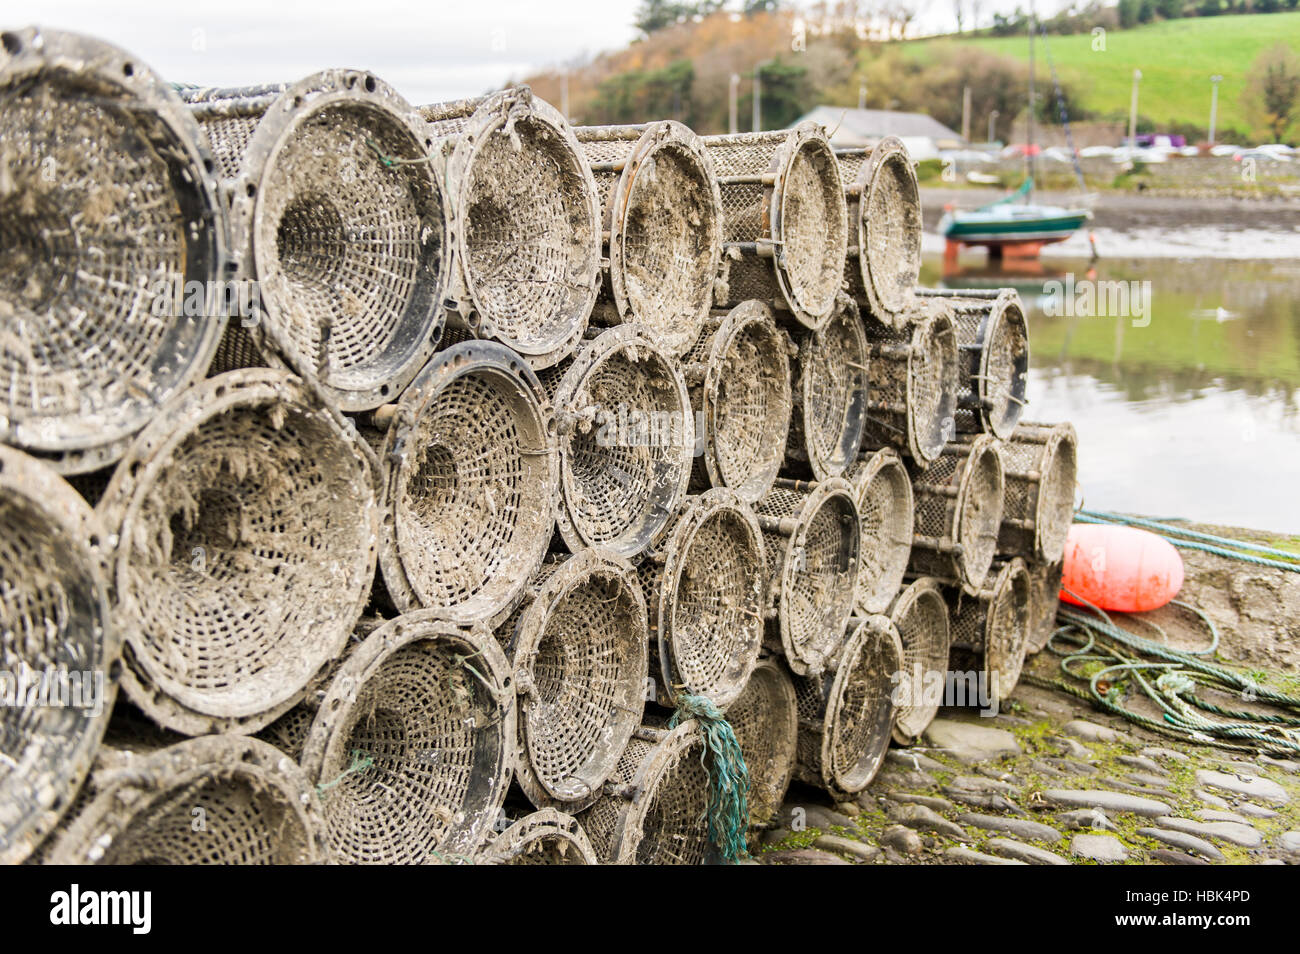 Stack of creels or crab and/or lobster pots on the dock in harbour in Ireland. Stock Photo